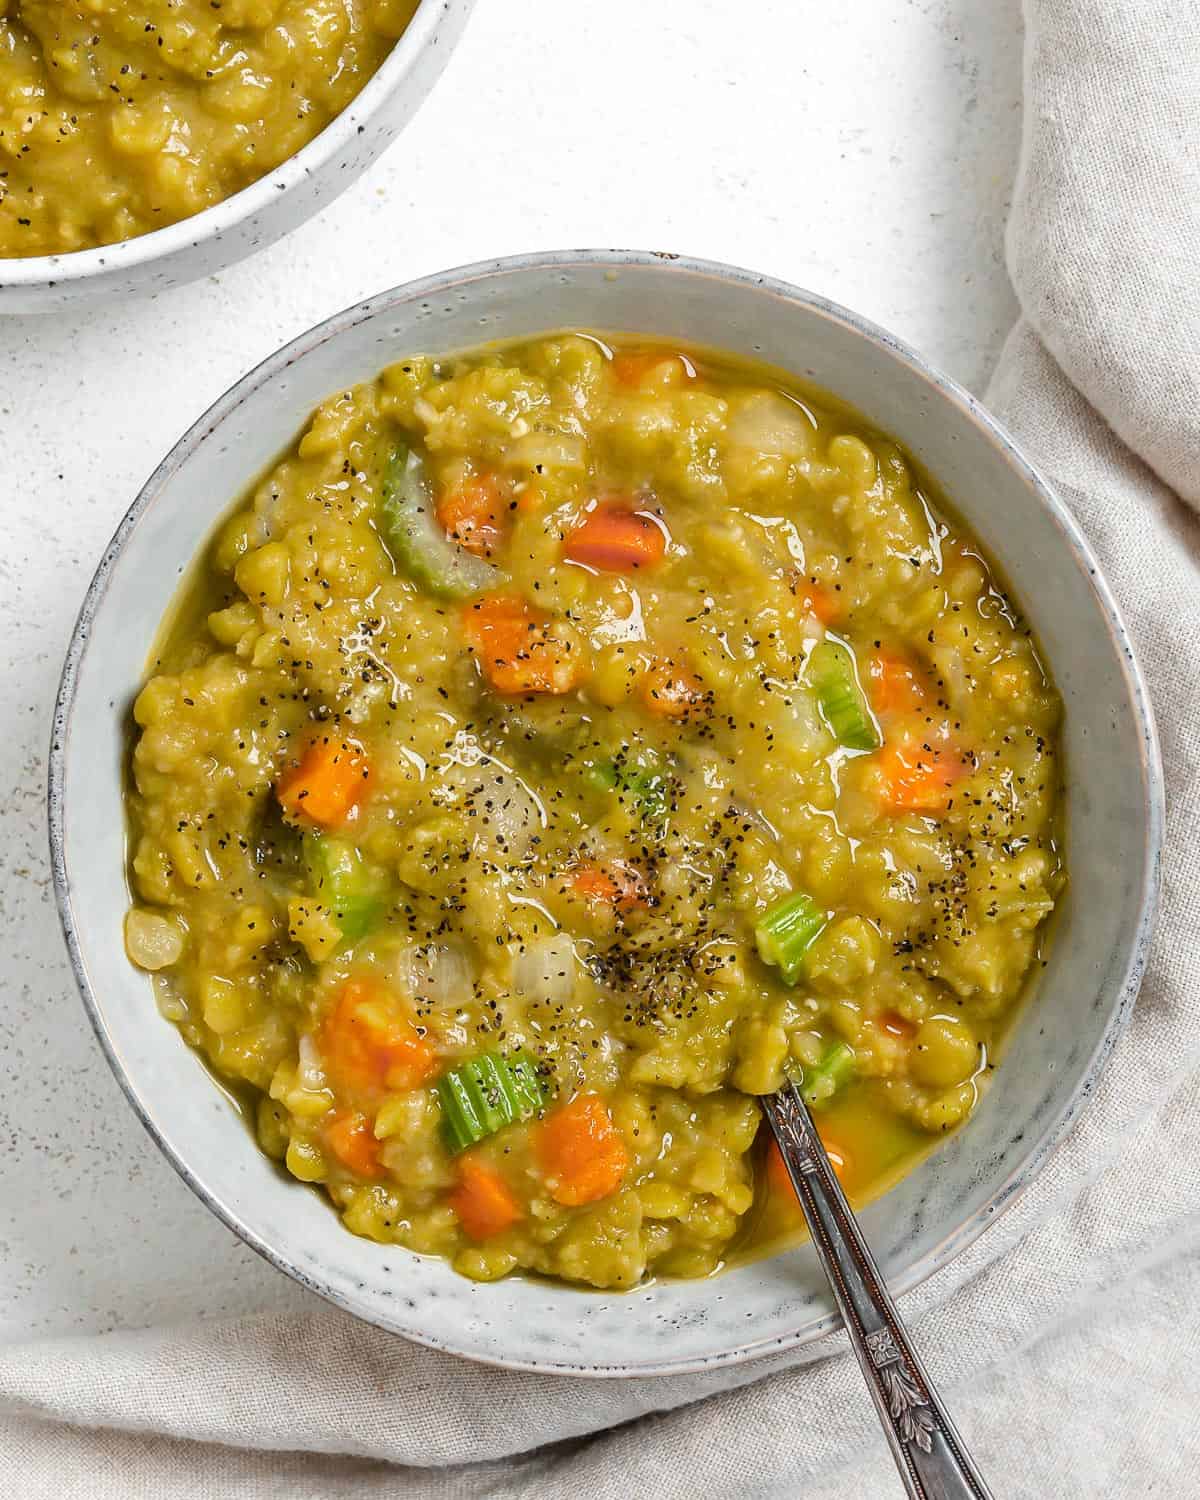 completed Vegan Split Pea Soup in a white bowl against a white surface